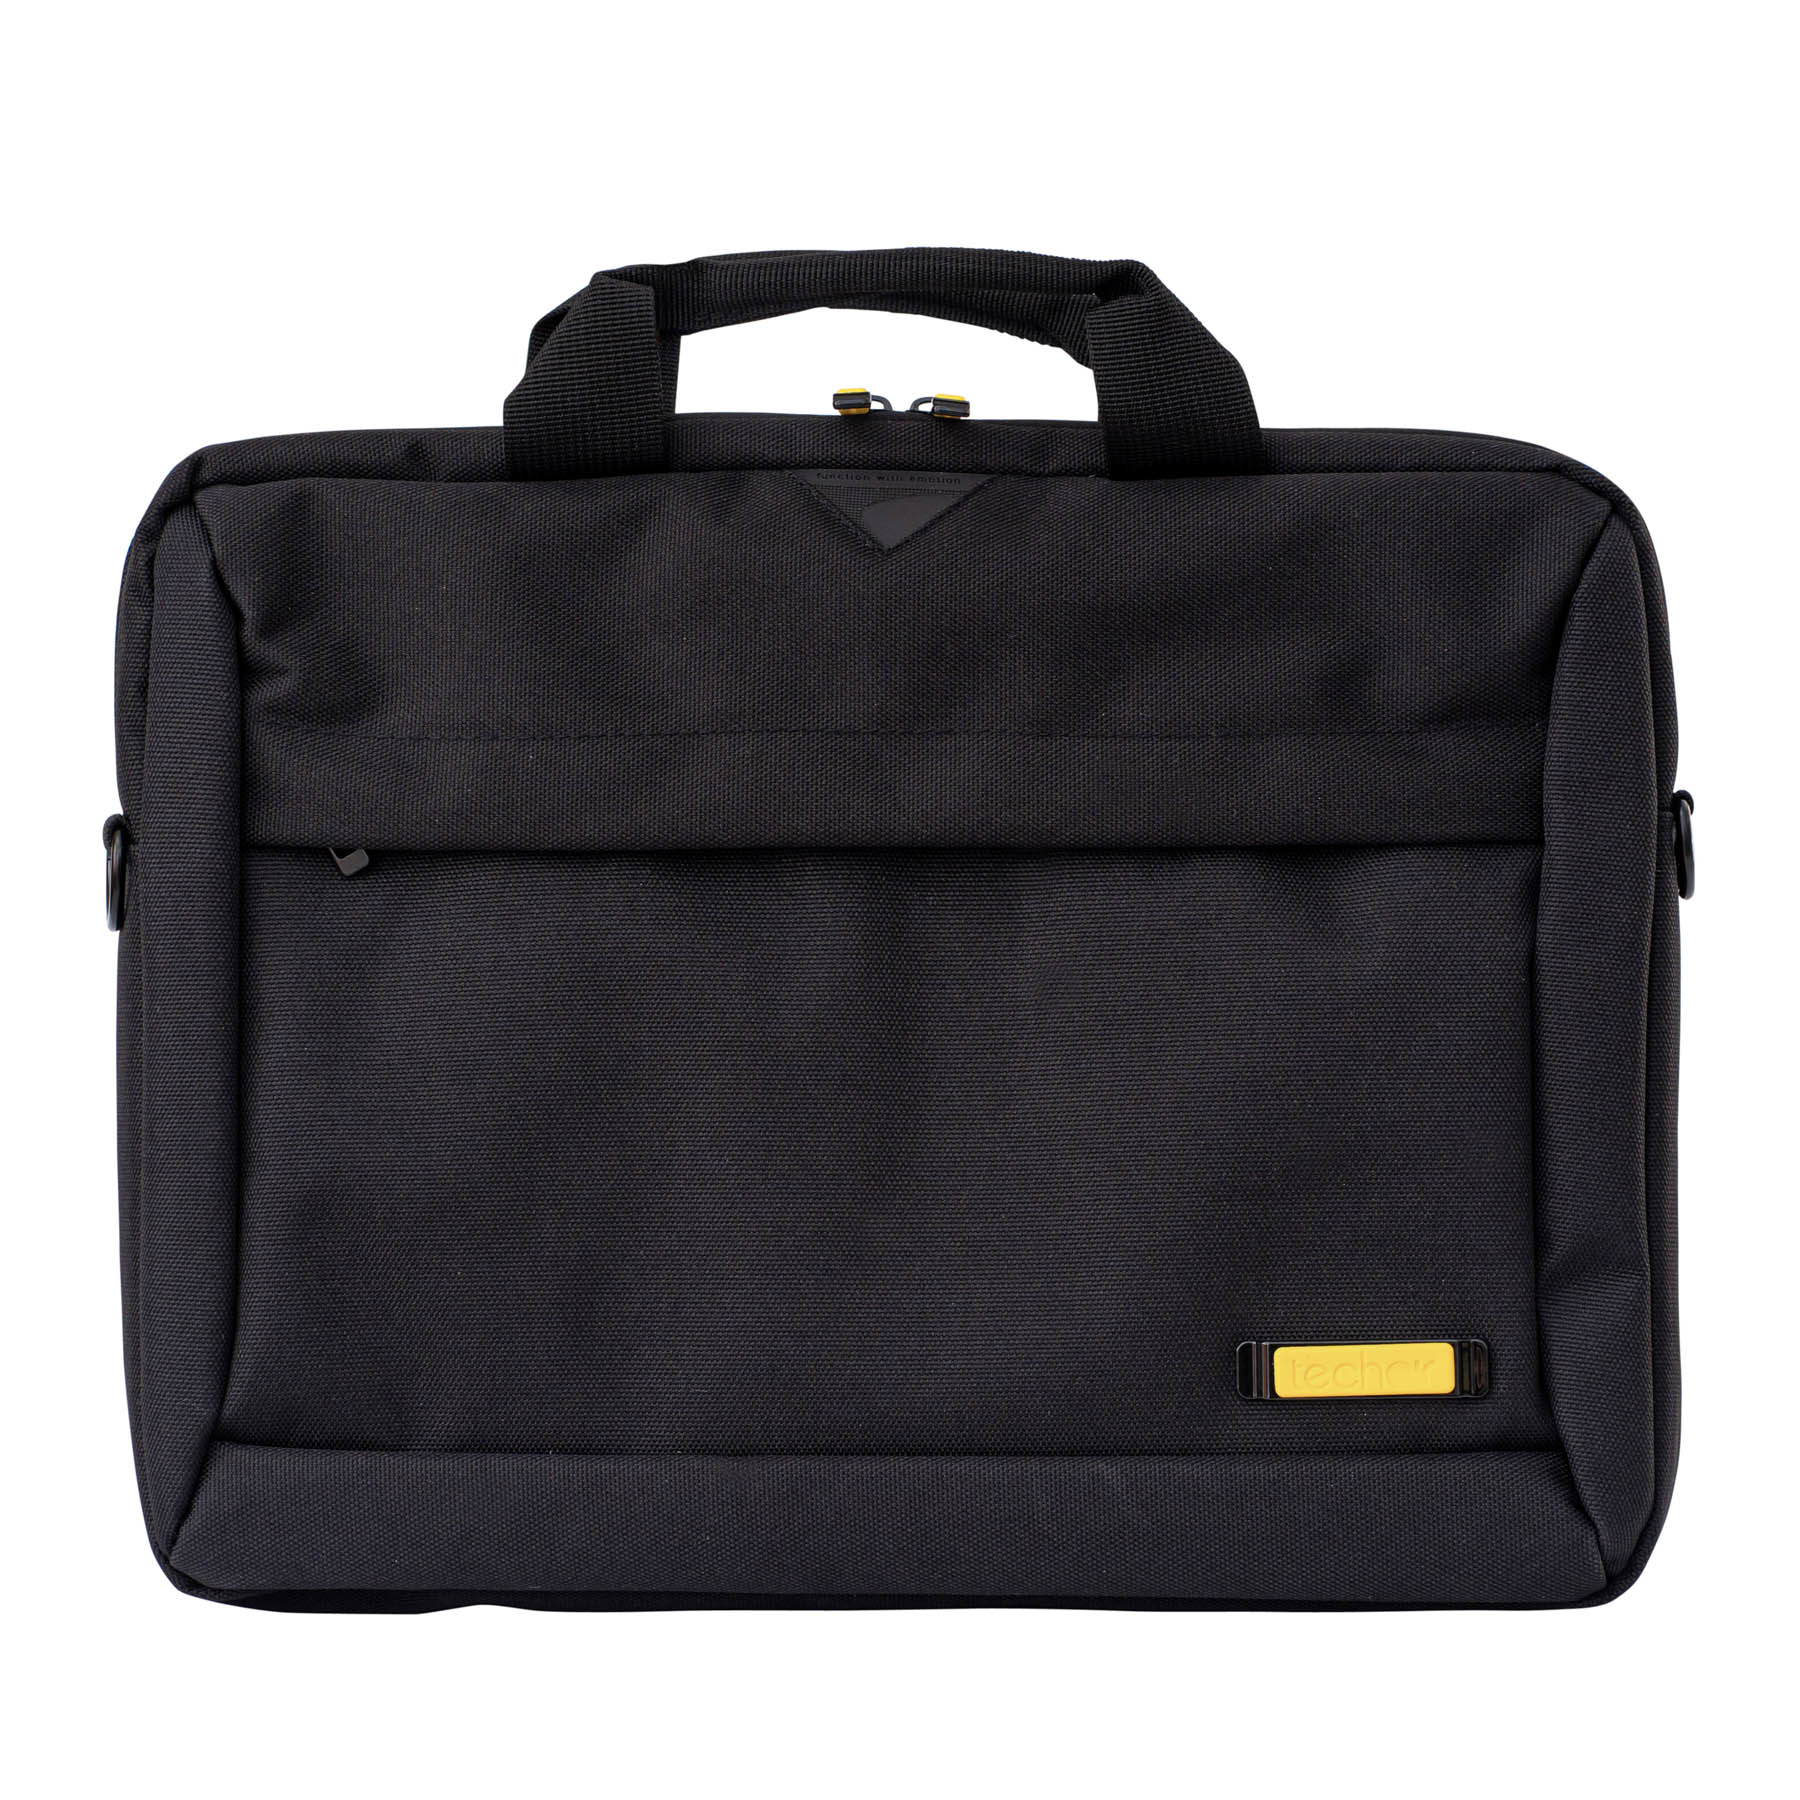 TAN1212 TECH AIR 14.1 Shoulder Bag Laptop Case Black; includes closed cell foam protection and removable / adjustable shoulder strap. Adaptable branding is available on this sku. .